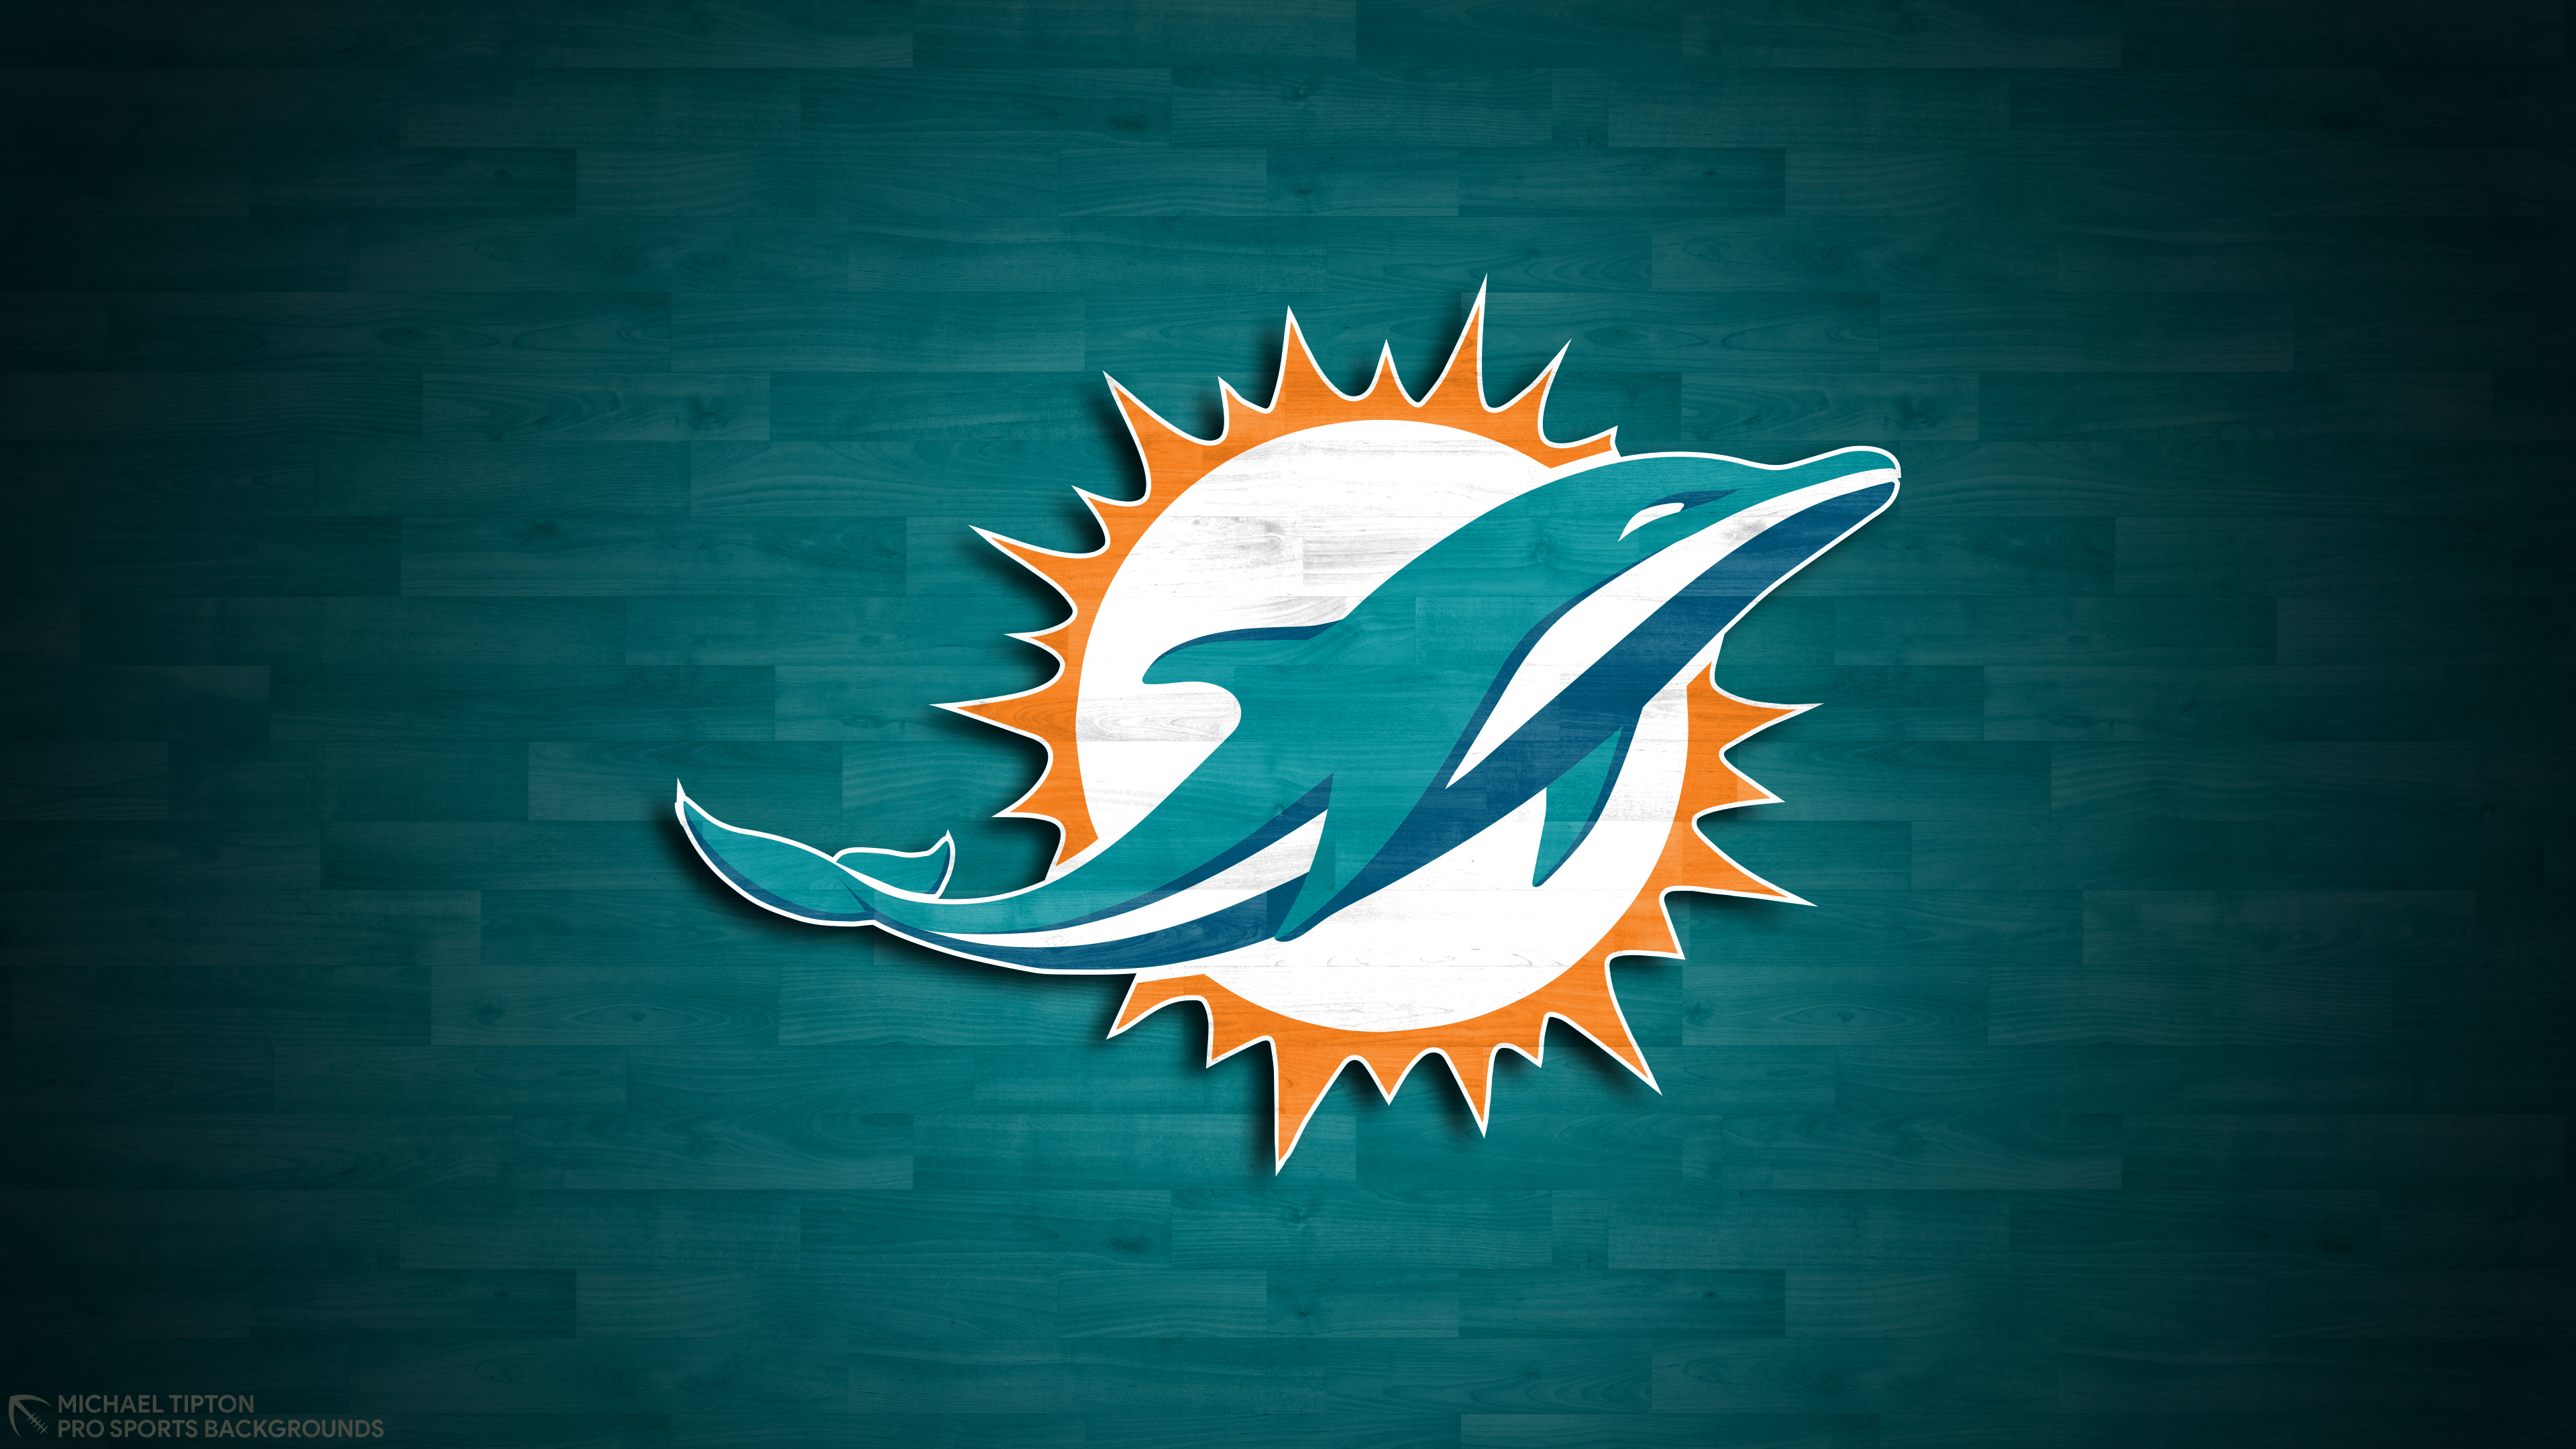 Miami Dolphins Wallpapers - Pro Sports Backgrounds.